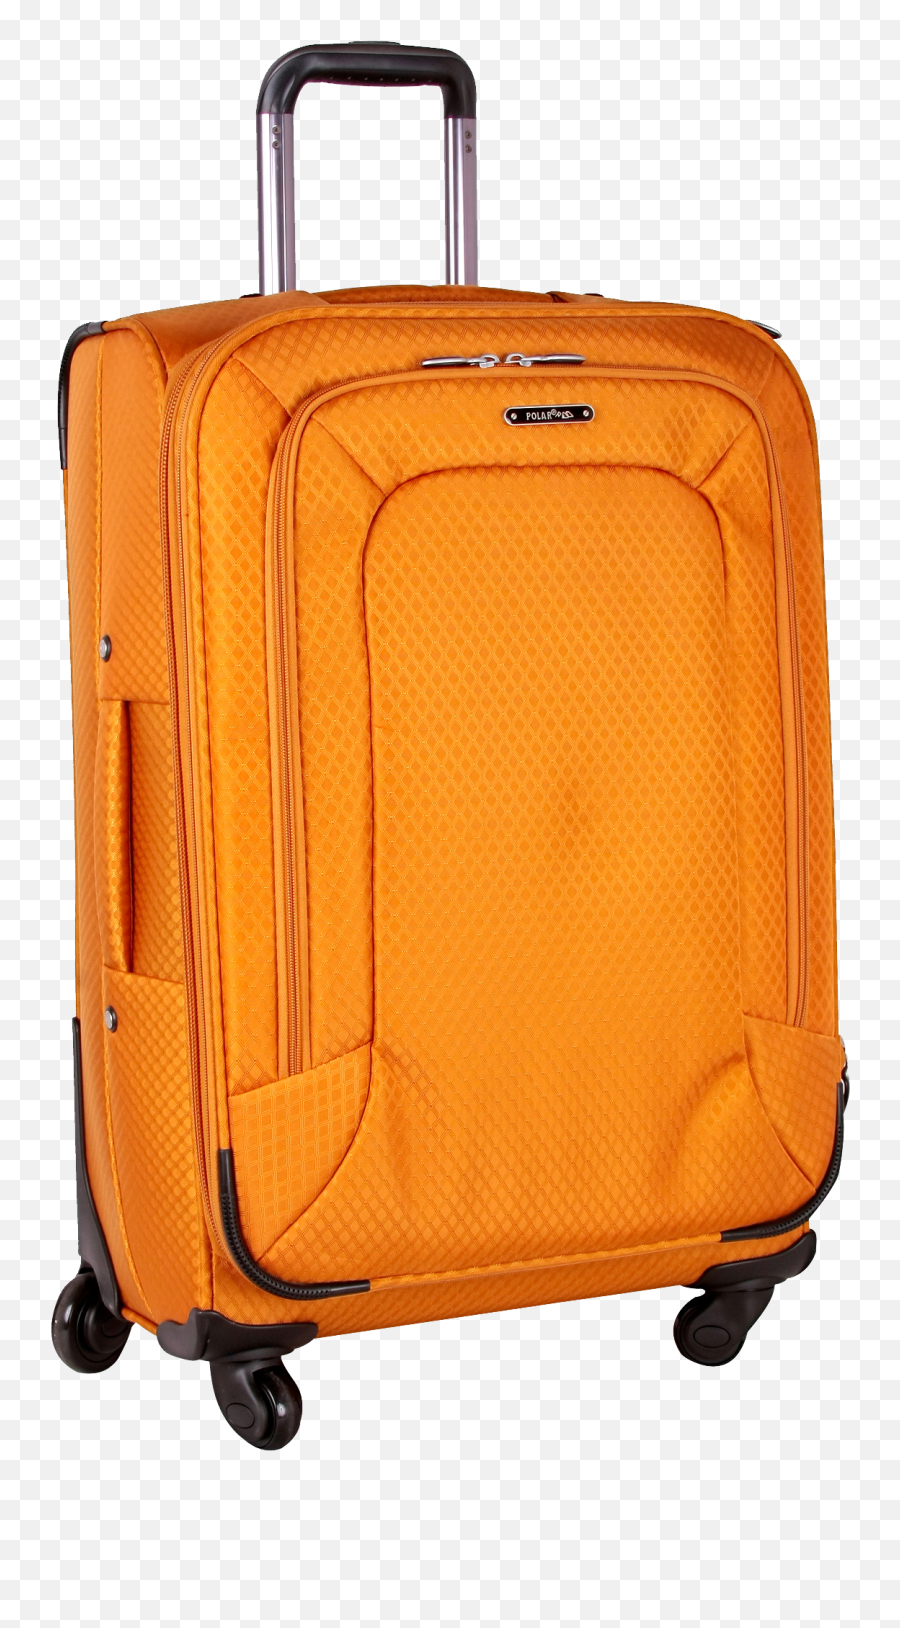 Yellow Suitcase Png Image Images Luggage - Orange Luggage Png,Suitcase Png